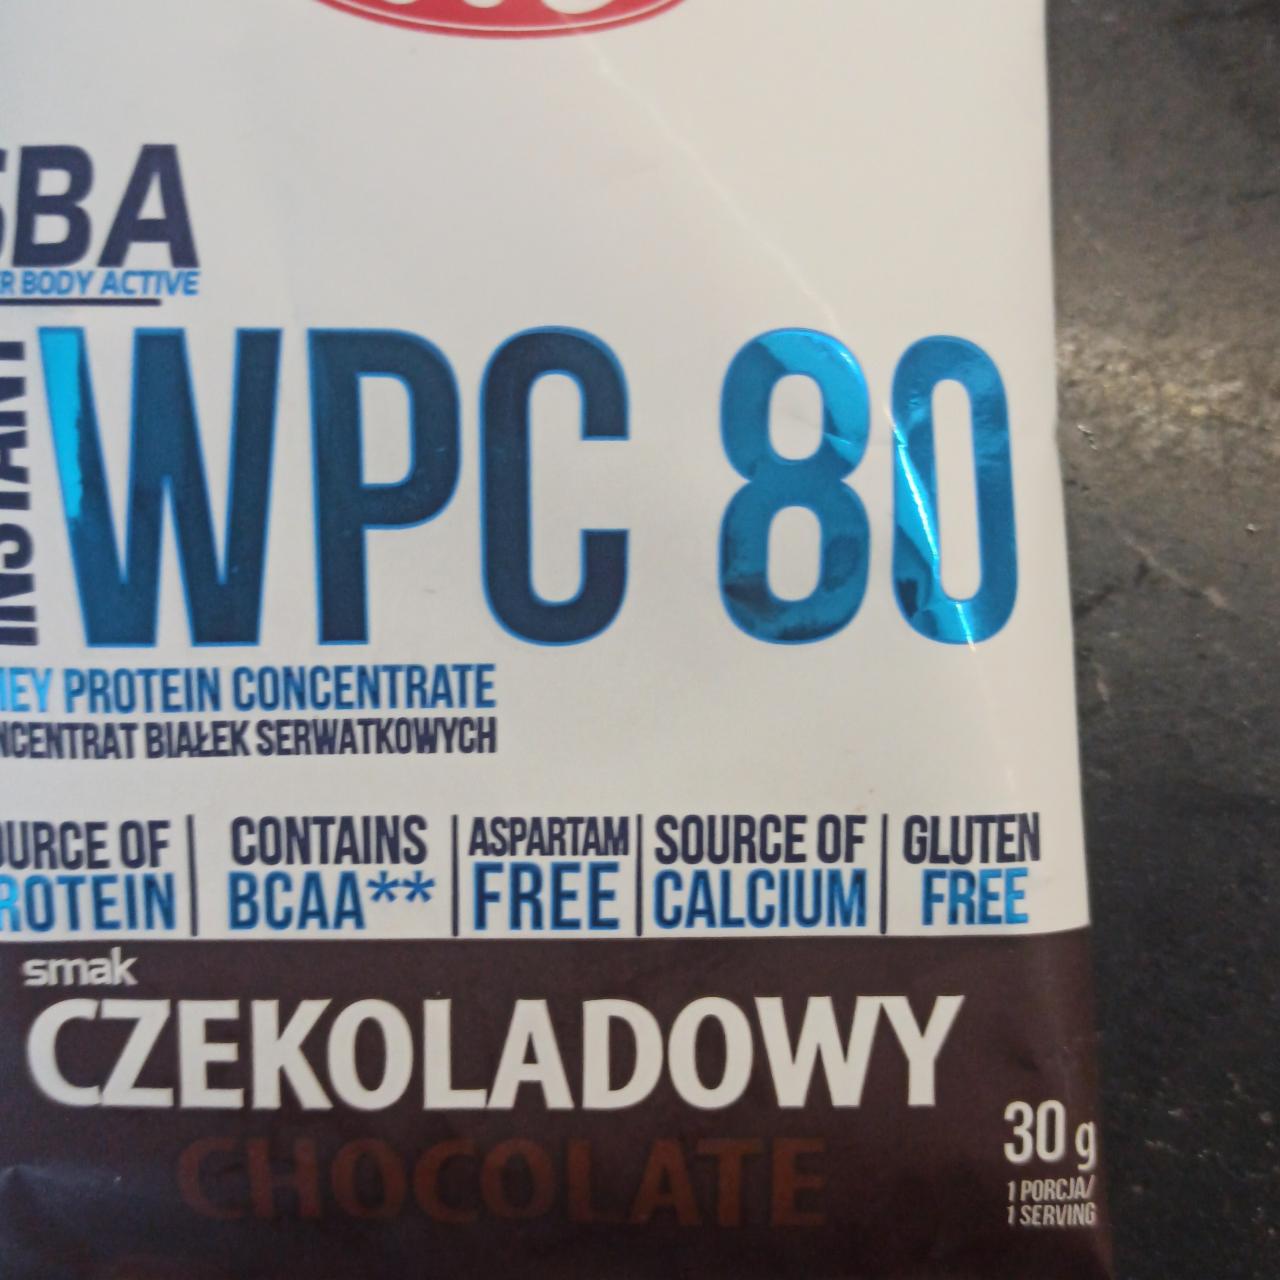 Fotografie - Whey protein concentrate WPC 80 Mlekovita